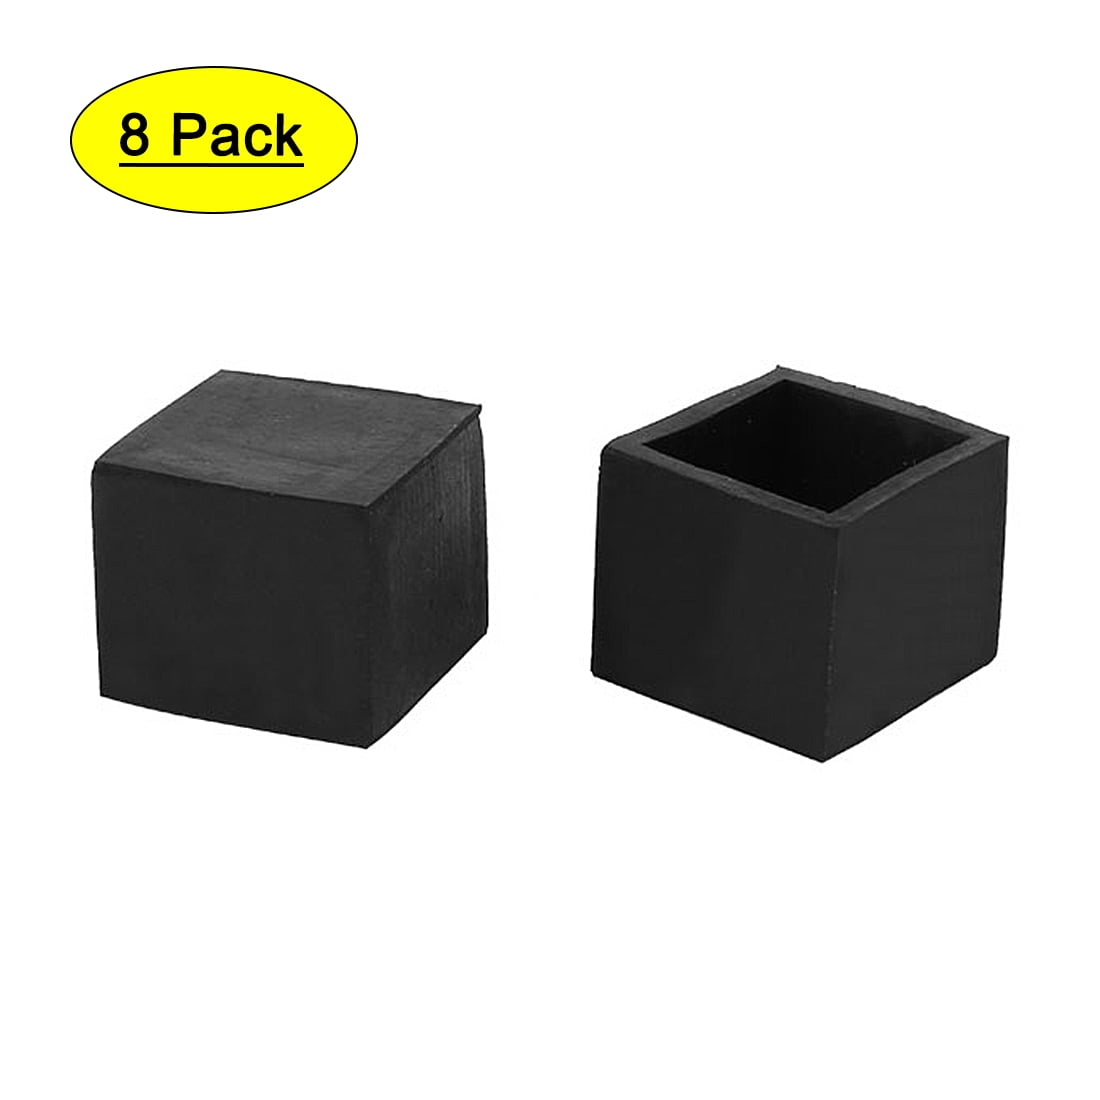 25mmx25mm Square Chair Leg Floor Protectors Table Feet Tips Covers Caps 8pcs